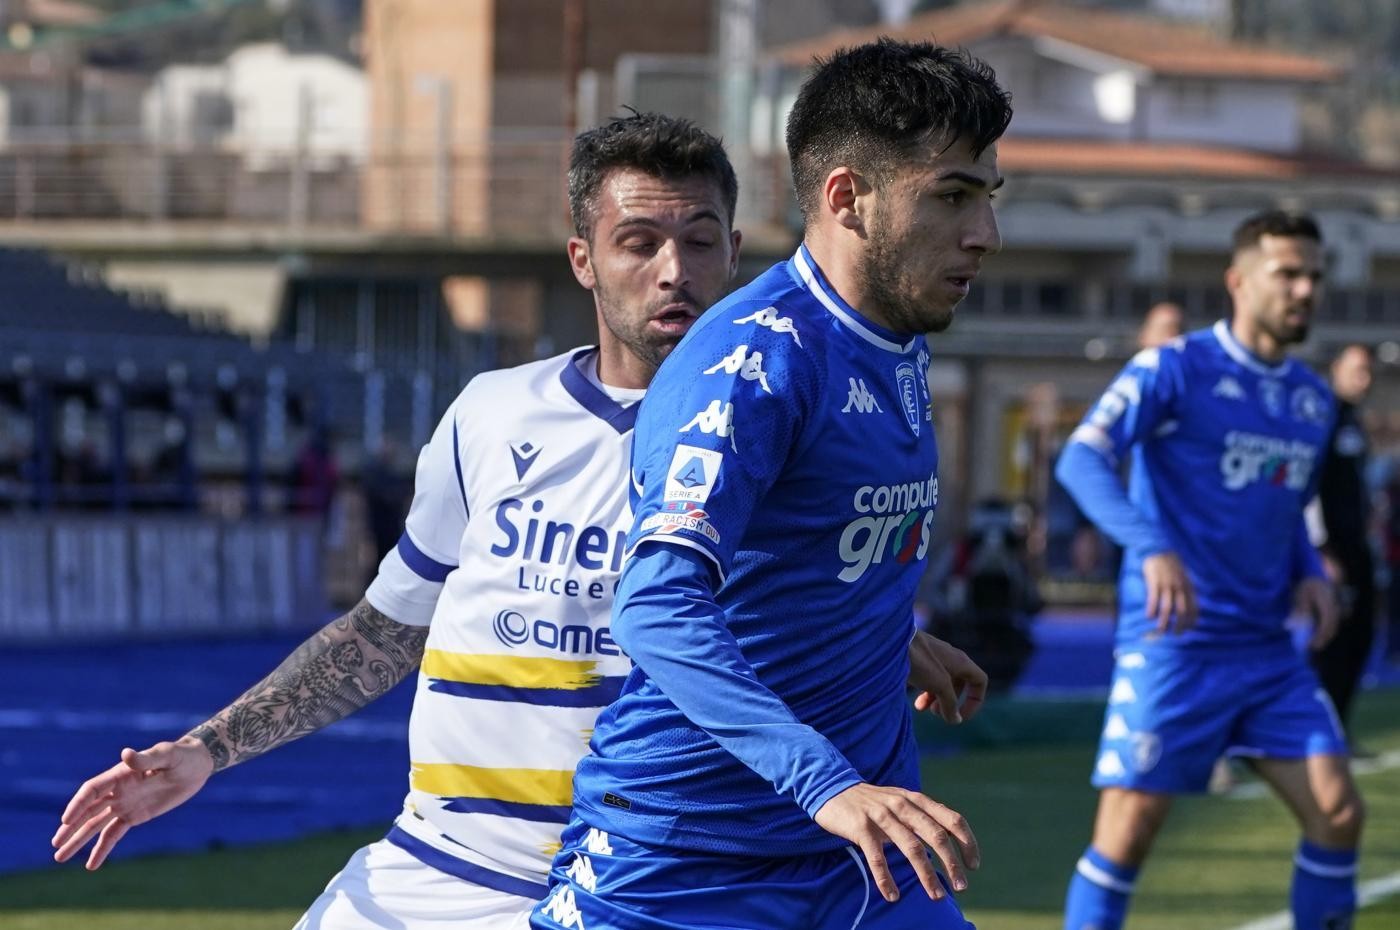 EMPOLI: PARISI CONTRACT EXTENDED UNTIL 2025